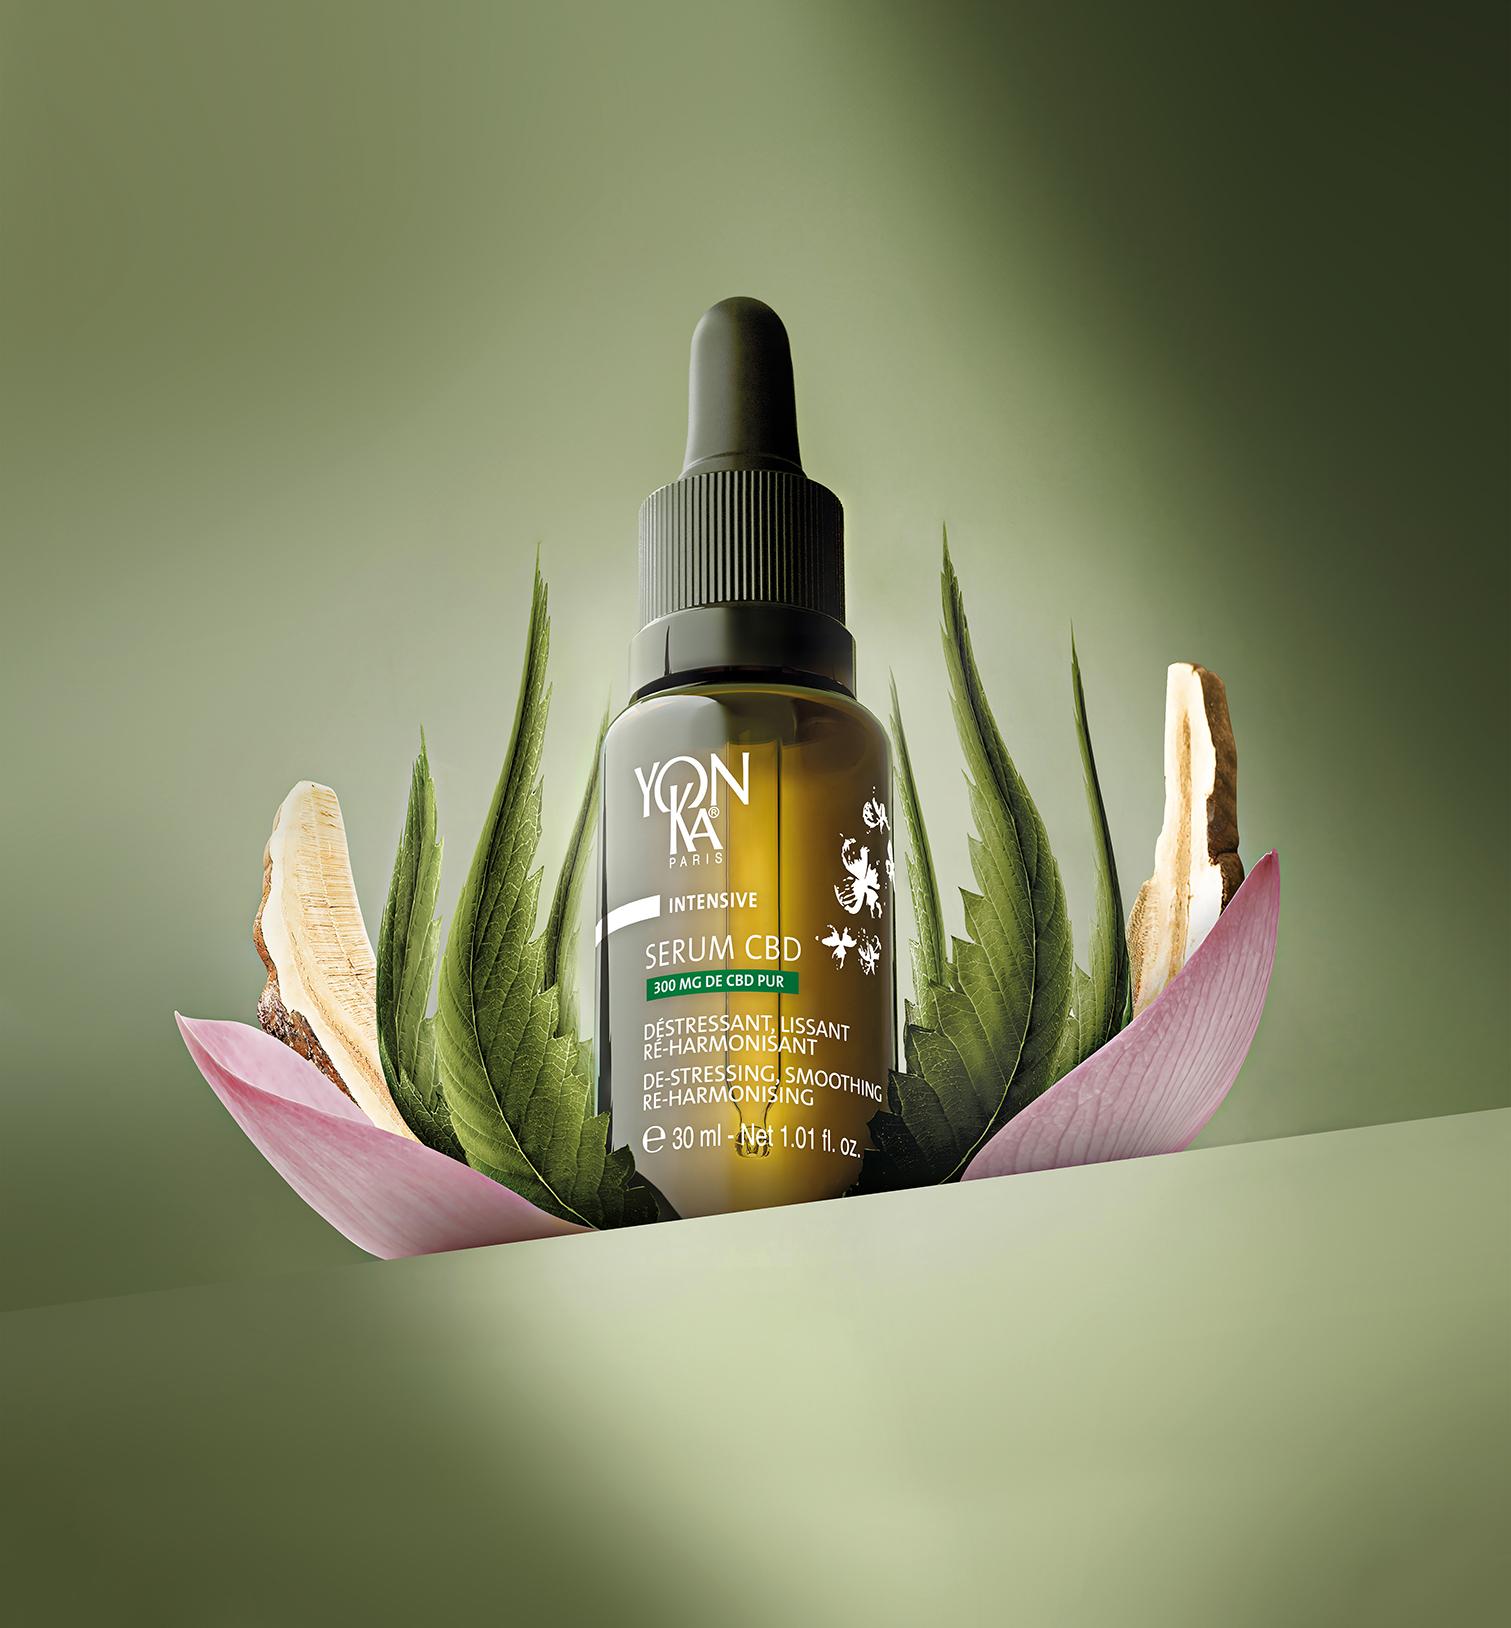 The serum's star ingredient is pure CBD, dosed at 300mg, grown sustainably in Colombia / Yon-Ka